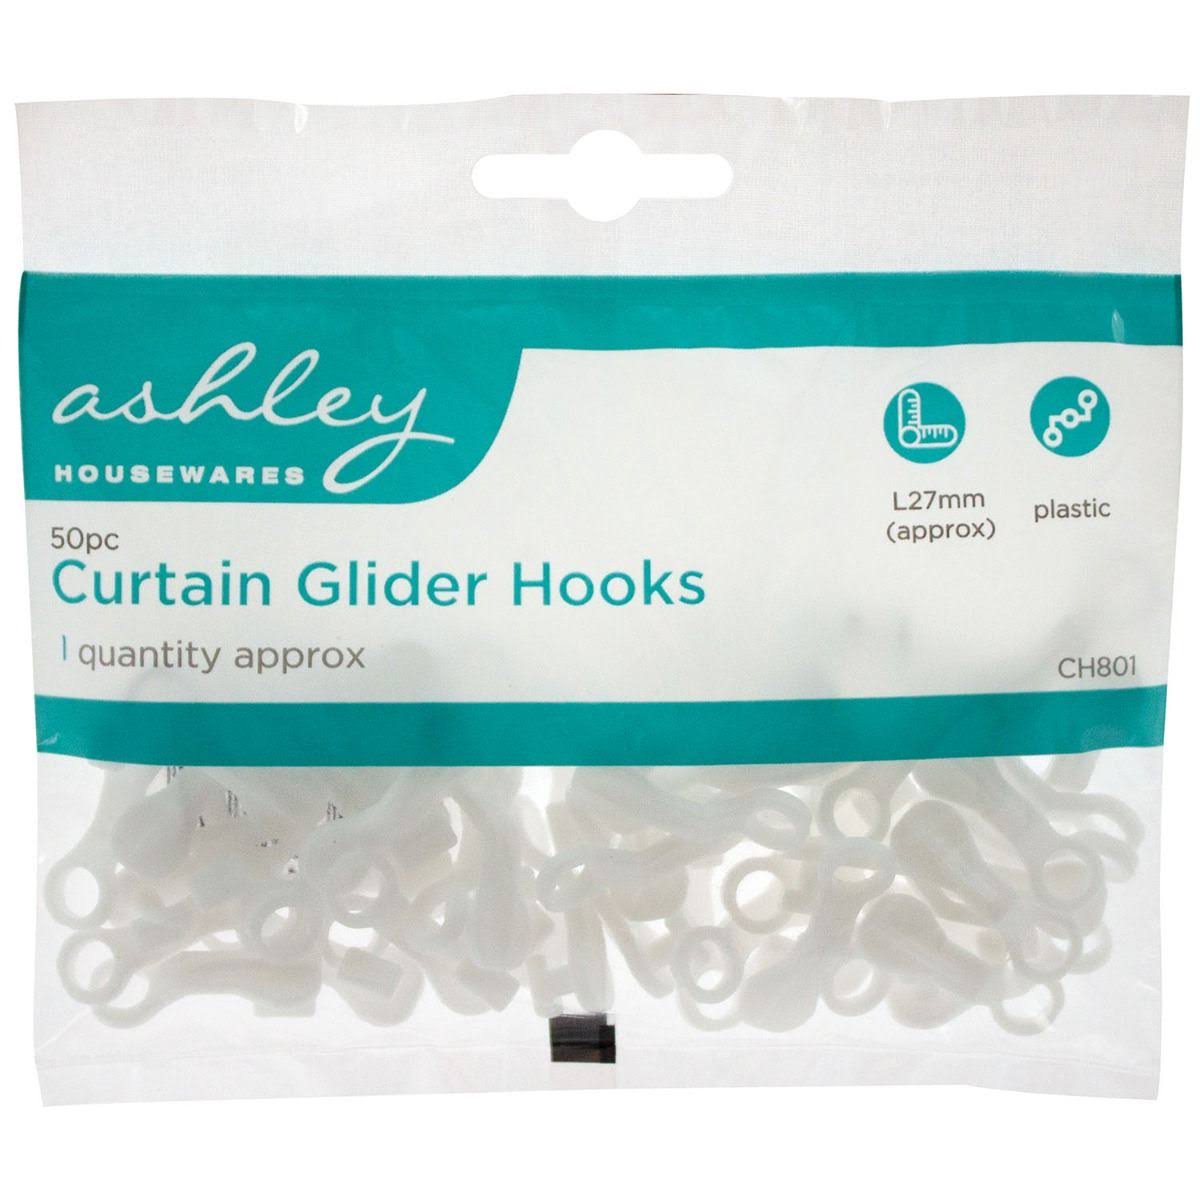 Ashley Housewares 27mm Curtain Glider Hooks - Pack of 50